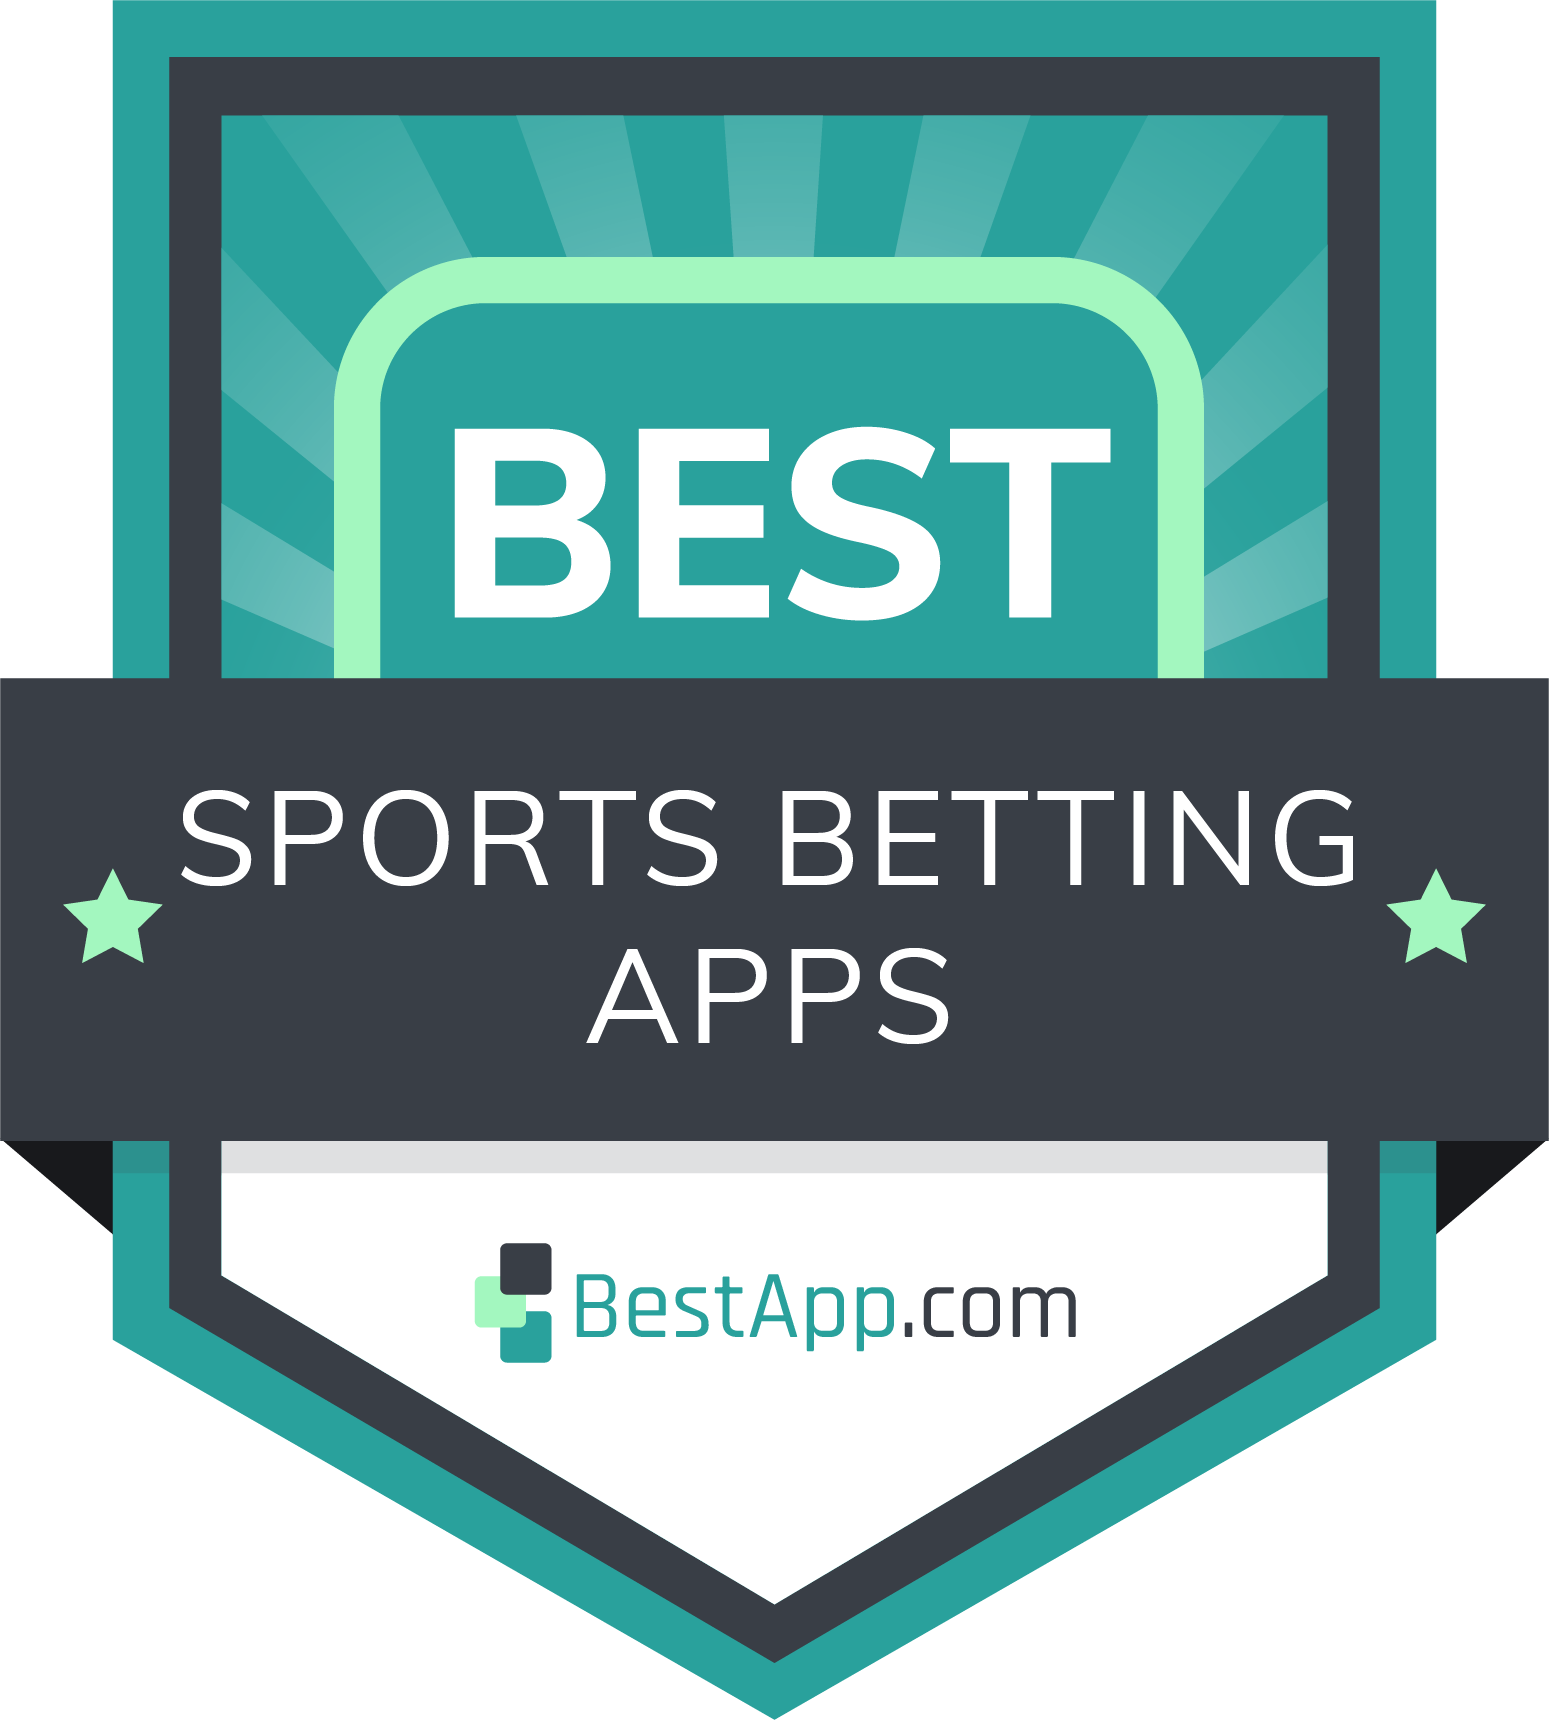 Best Sports Betting Apps Badge